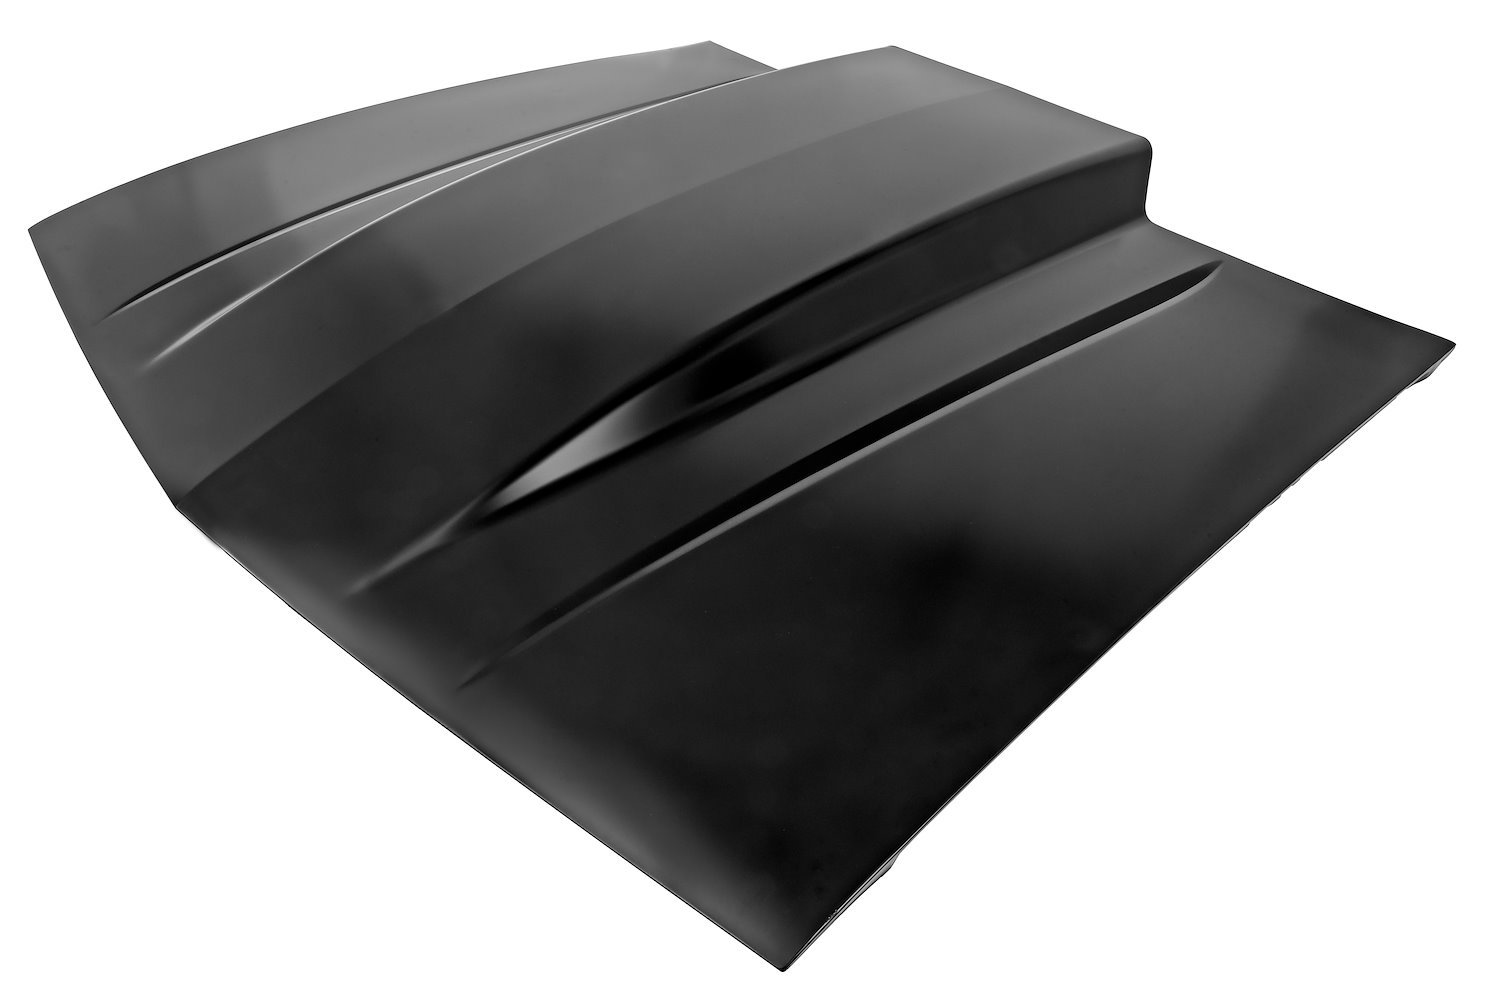 Steel Cowl Induction Hood for 1982-1992 Chevrolet Camaro